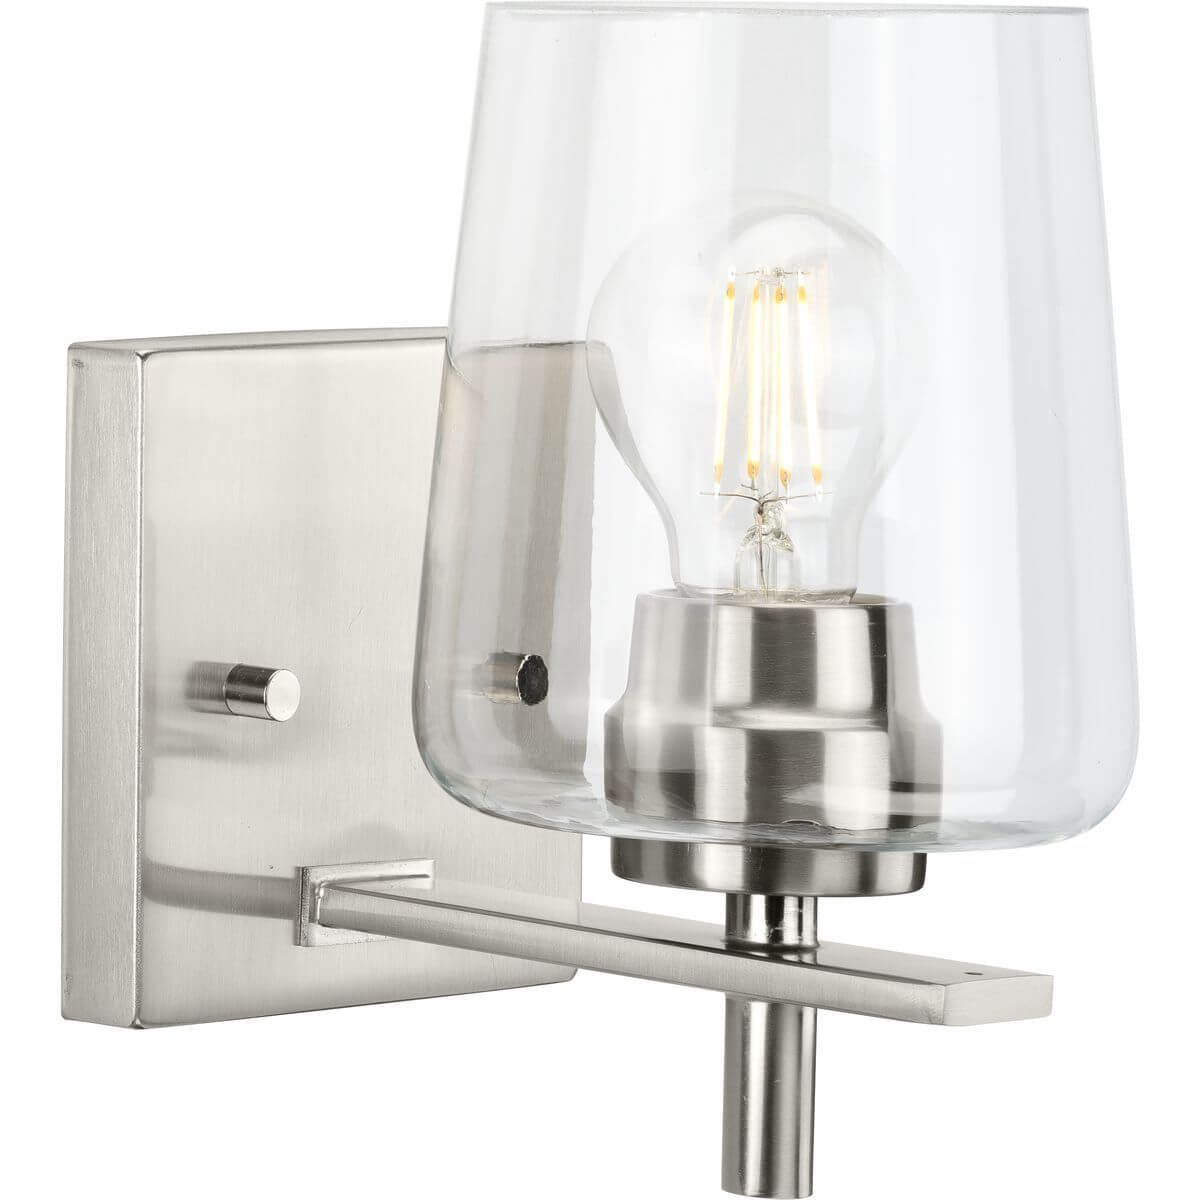 Progress Lighting Calais 1 Light 7 inch Bath Vanity Light in Brushed Nickel with Clear Glass P300360-009